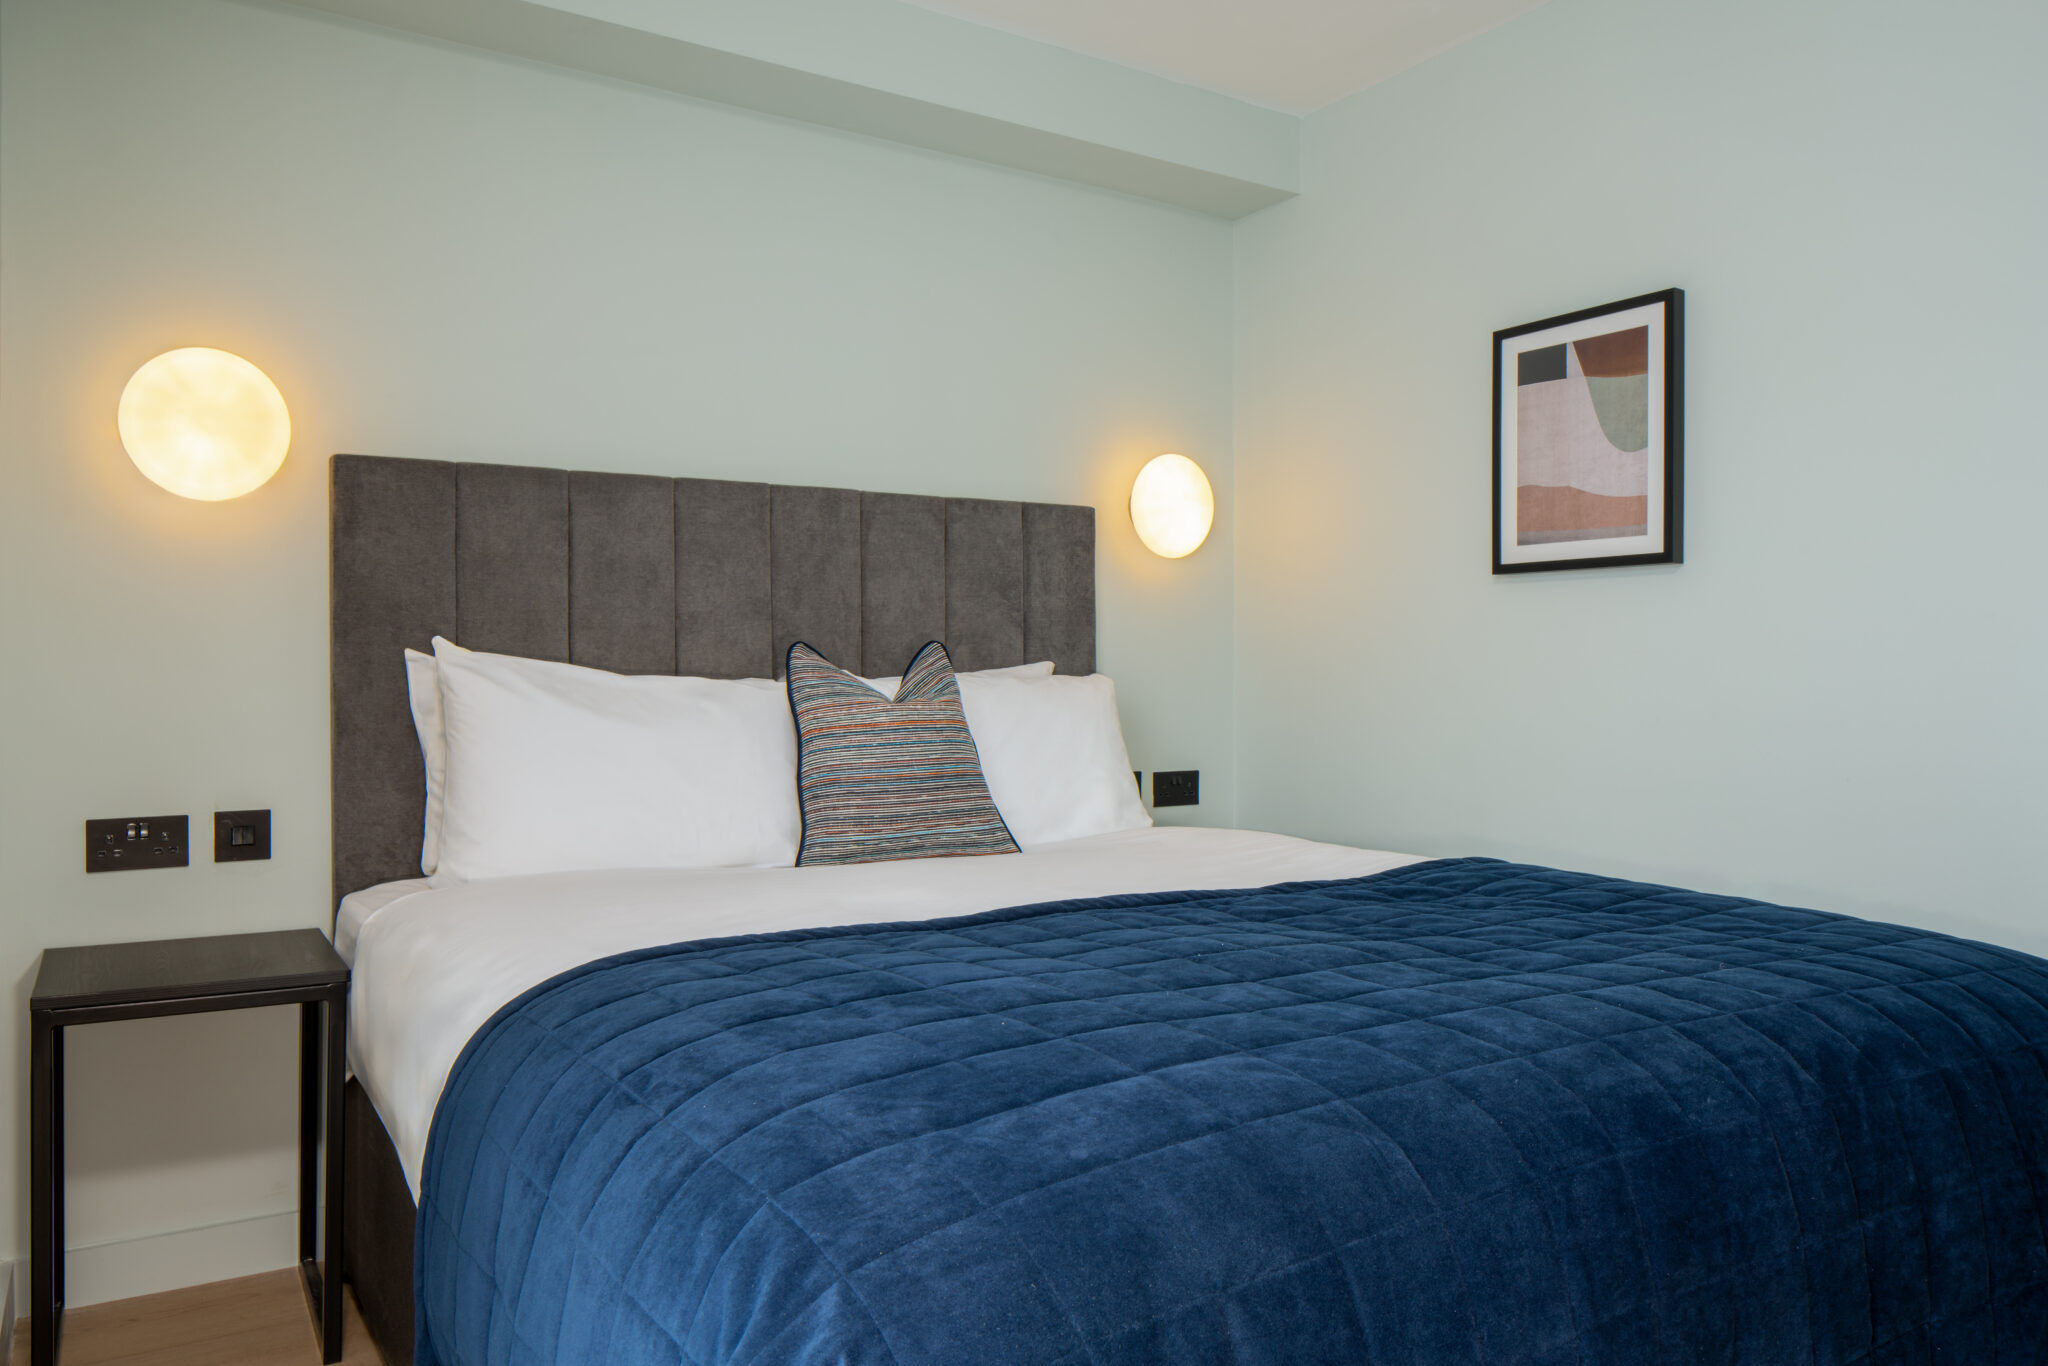 Newhall Square Apartments Serviced Apartments - Birmingham | Urban Stay